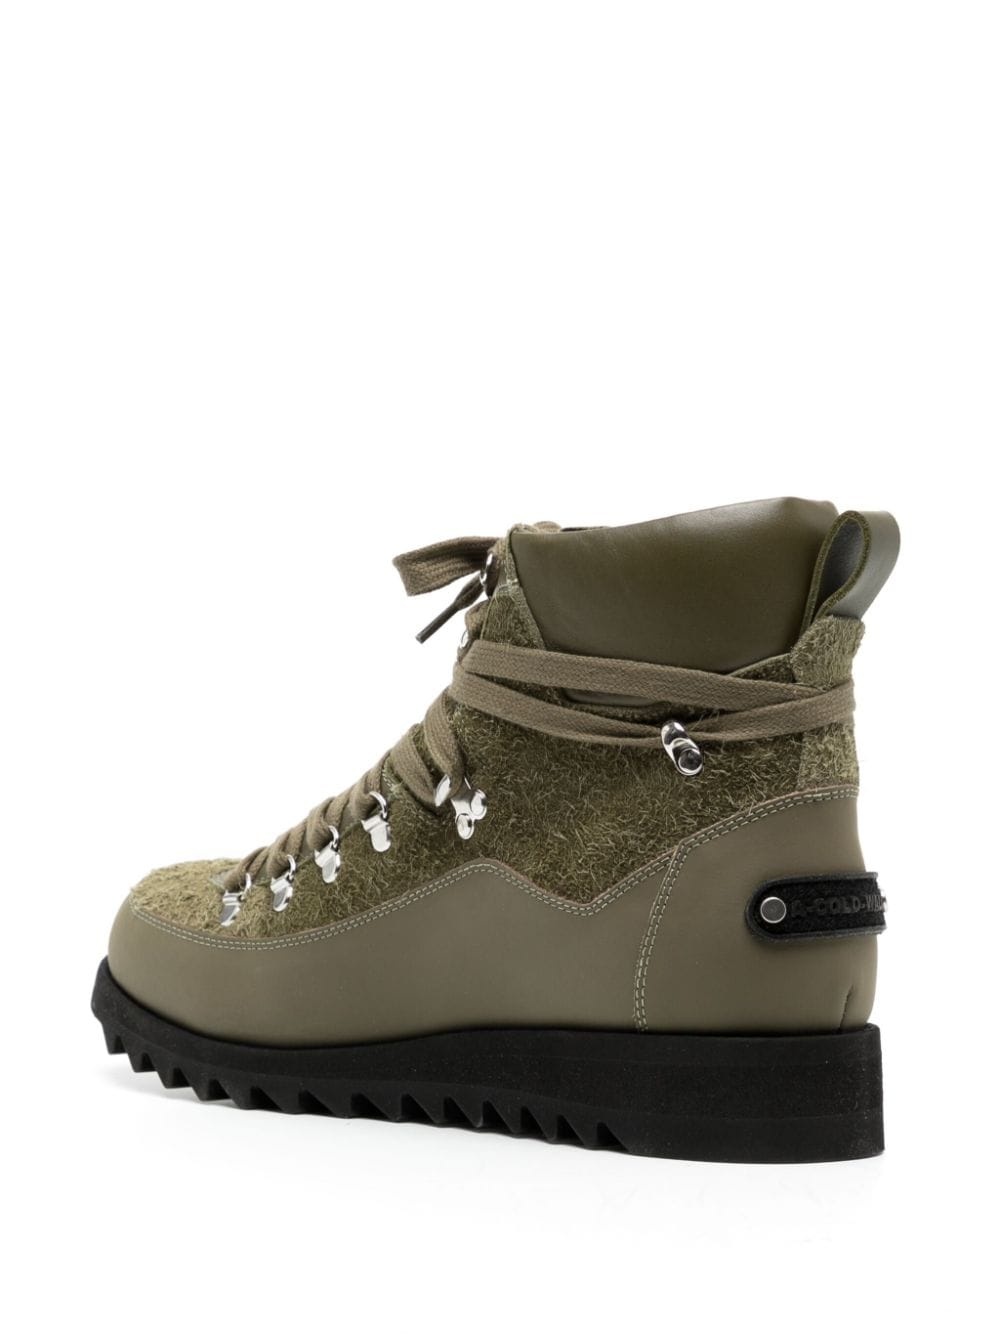 Alpine leather hiking boots - 3